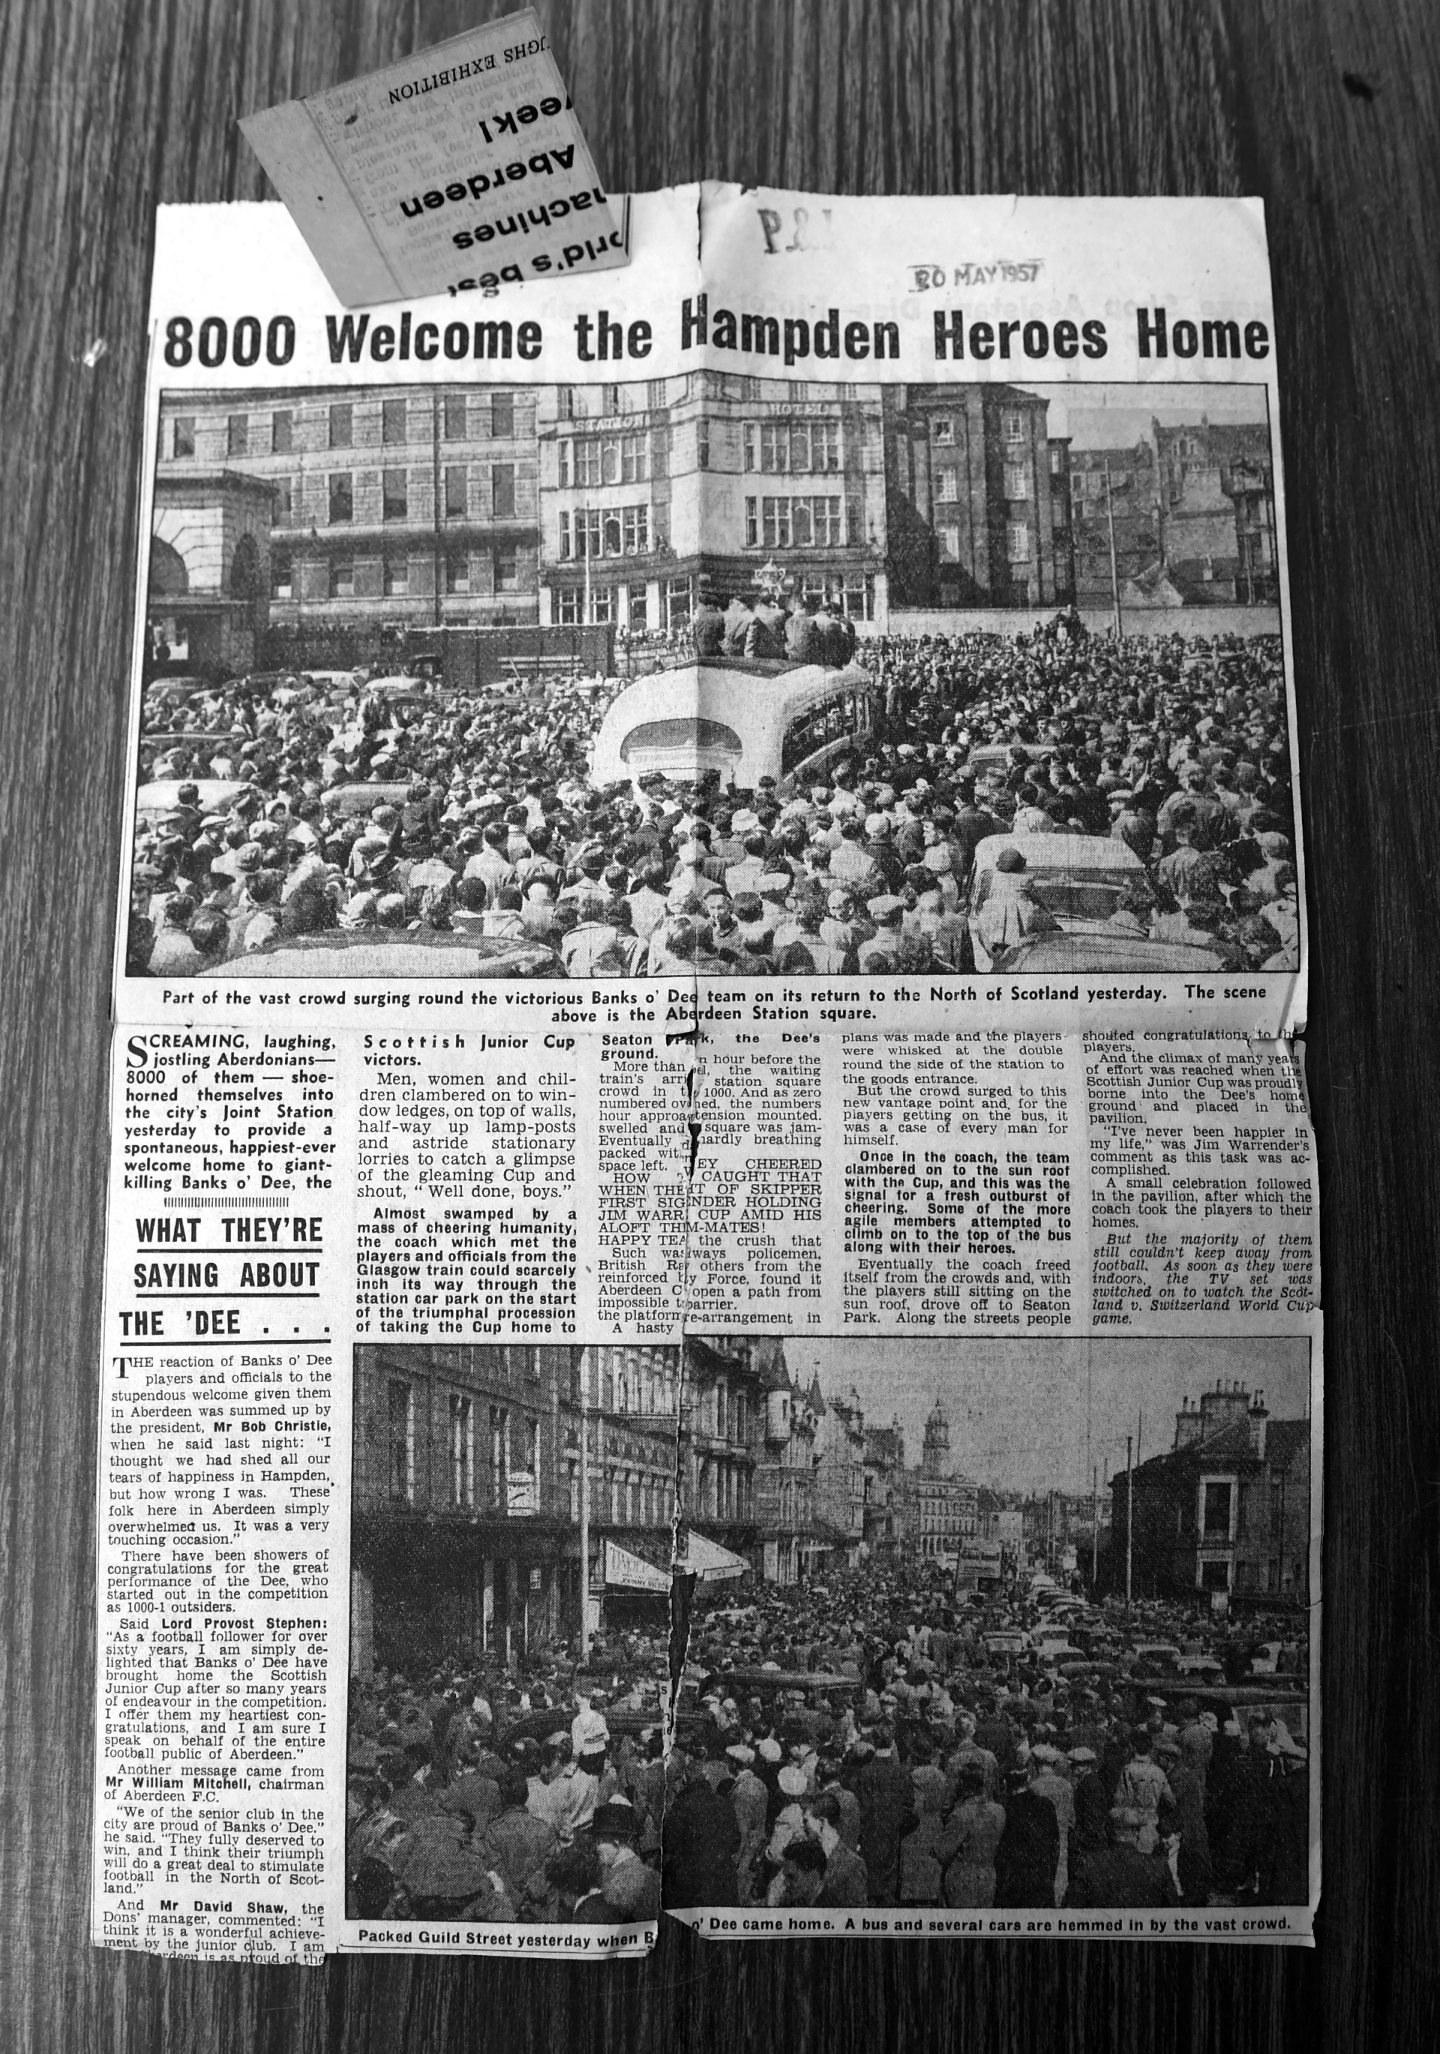 Pictured is the headline "8000 Welcome the Hampden Heroes Home" 